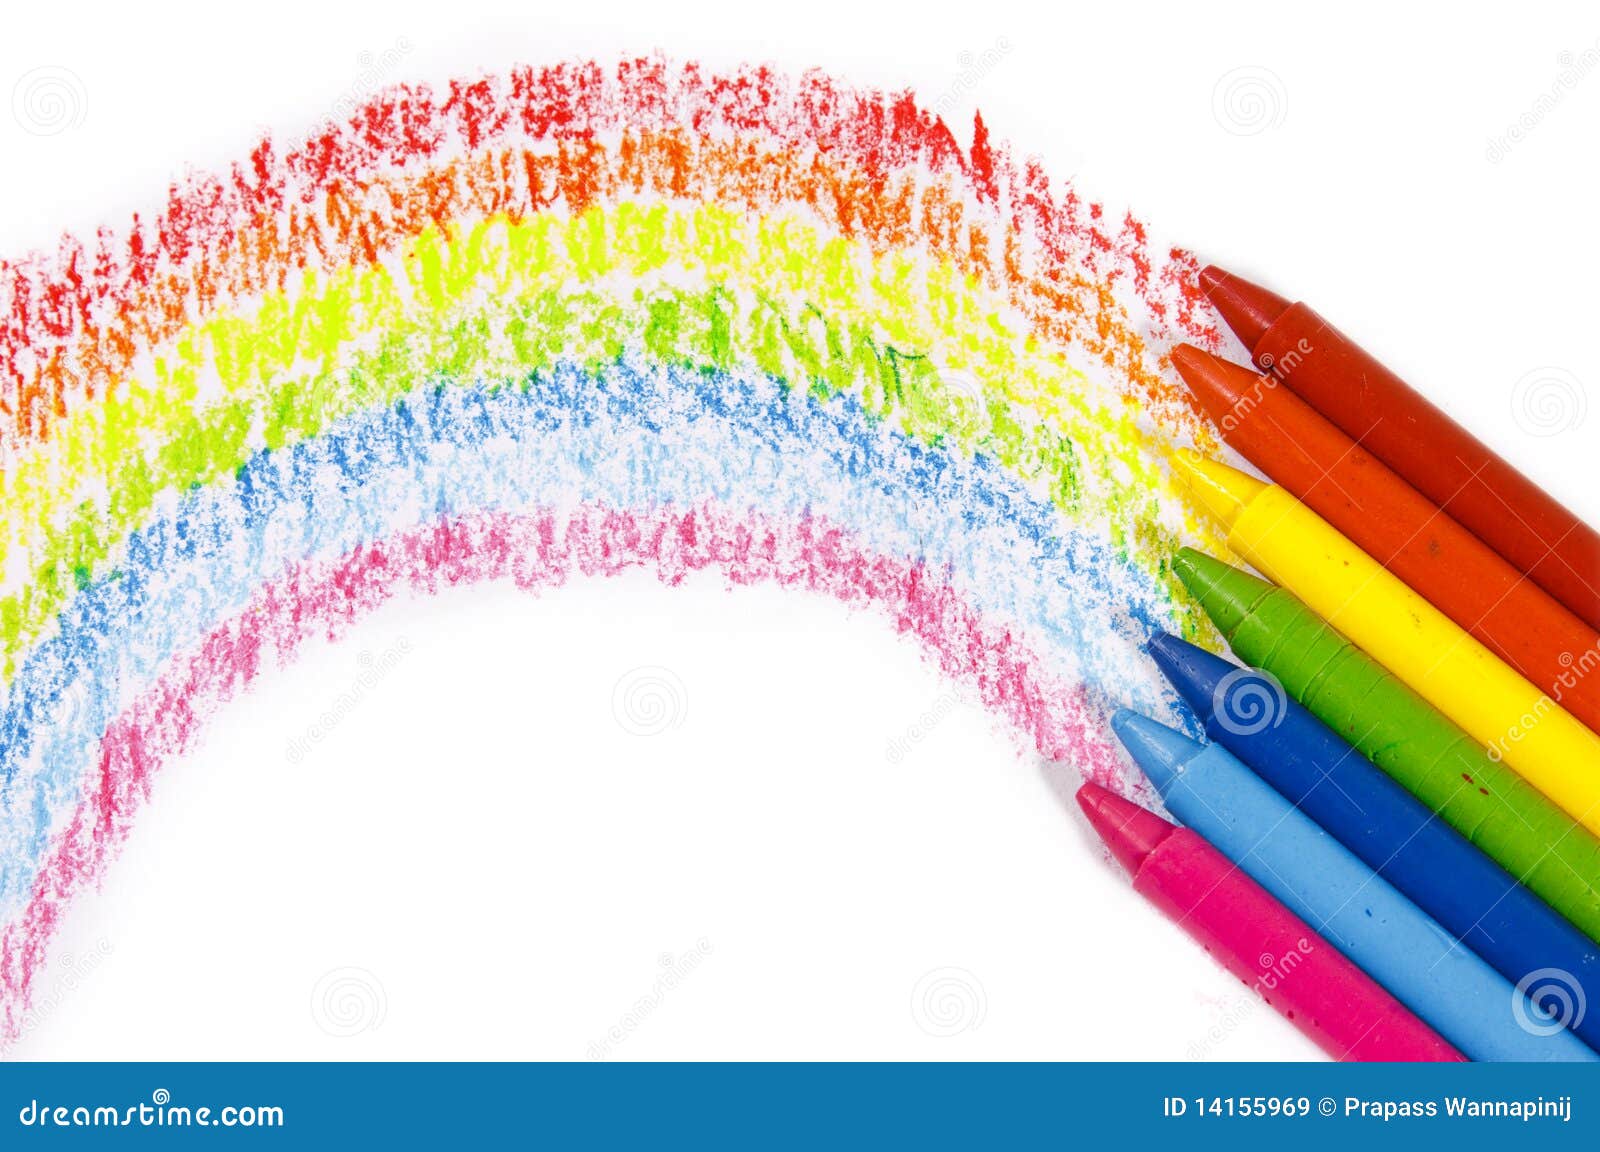 rainbow colorful crayon color for children